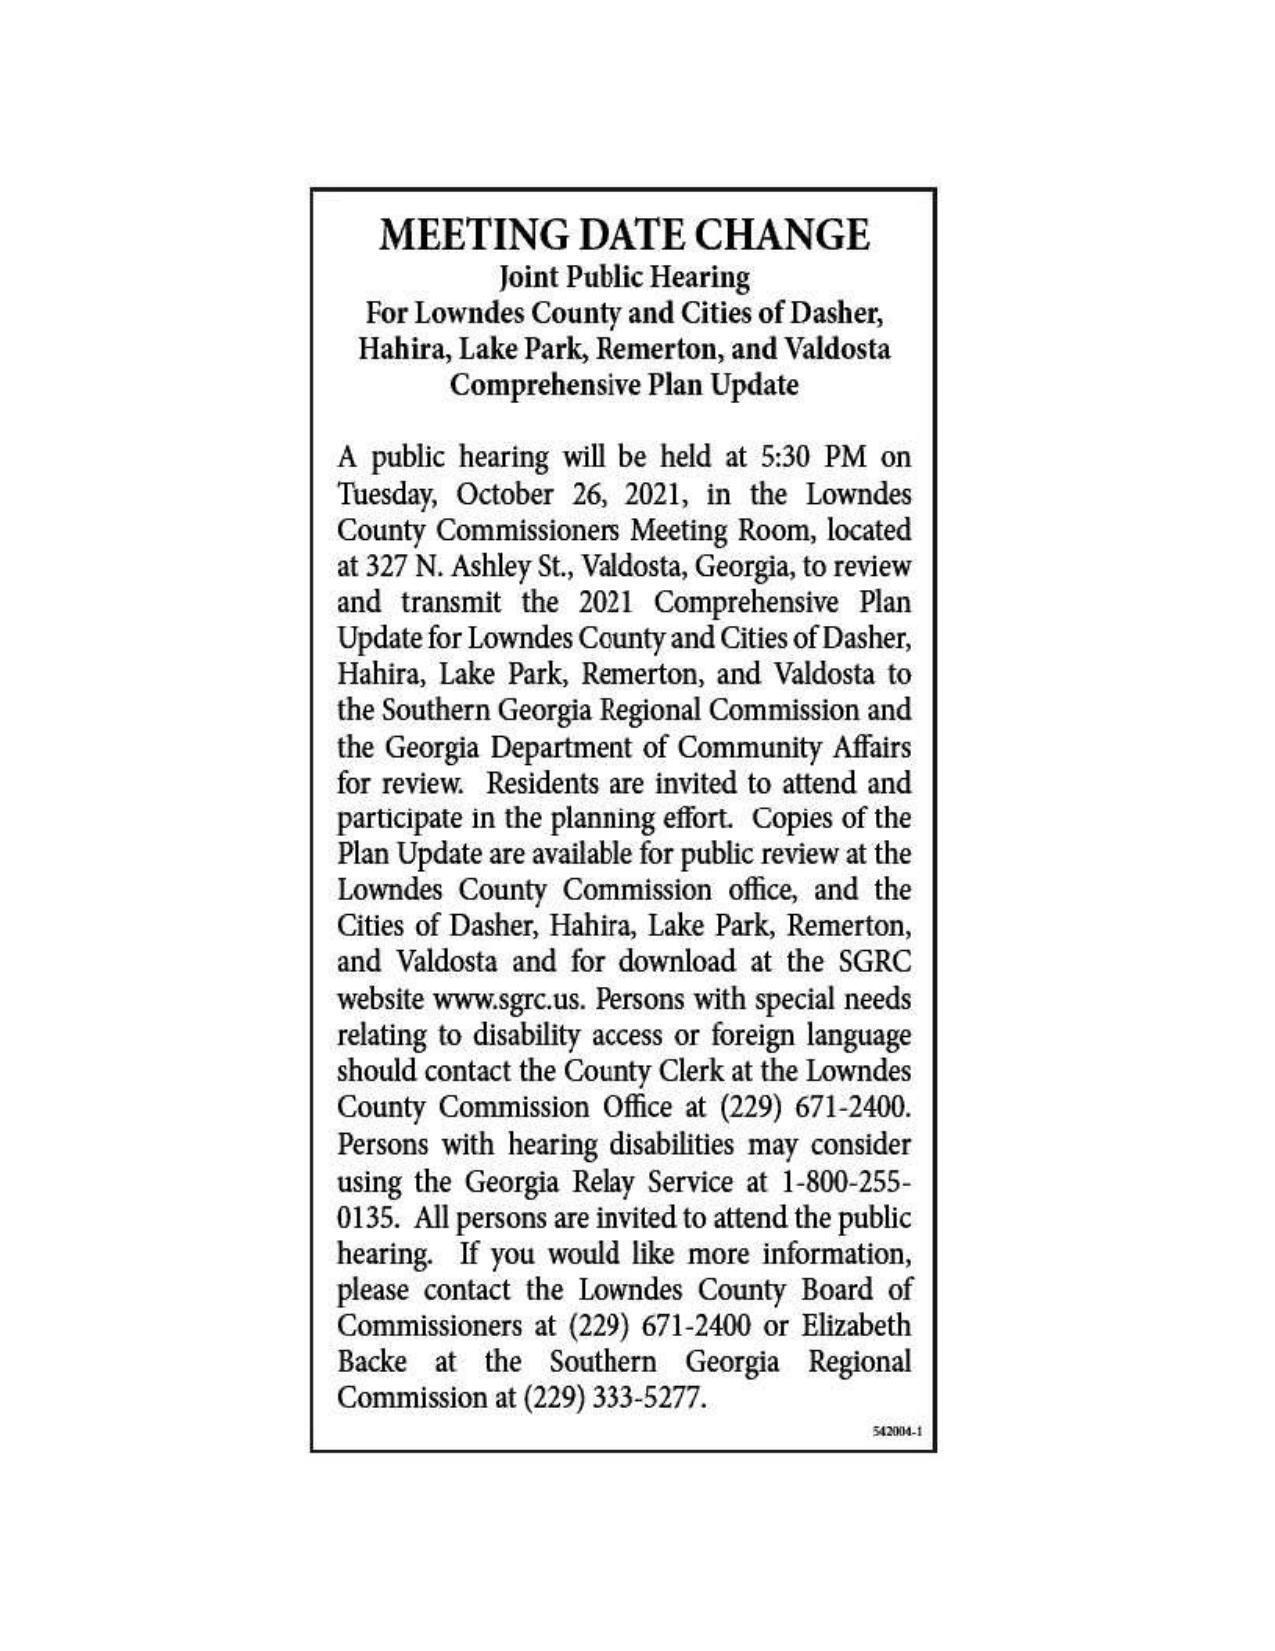 Meeting Date Change to 2021-10-26